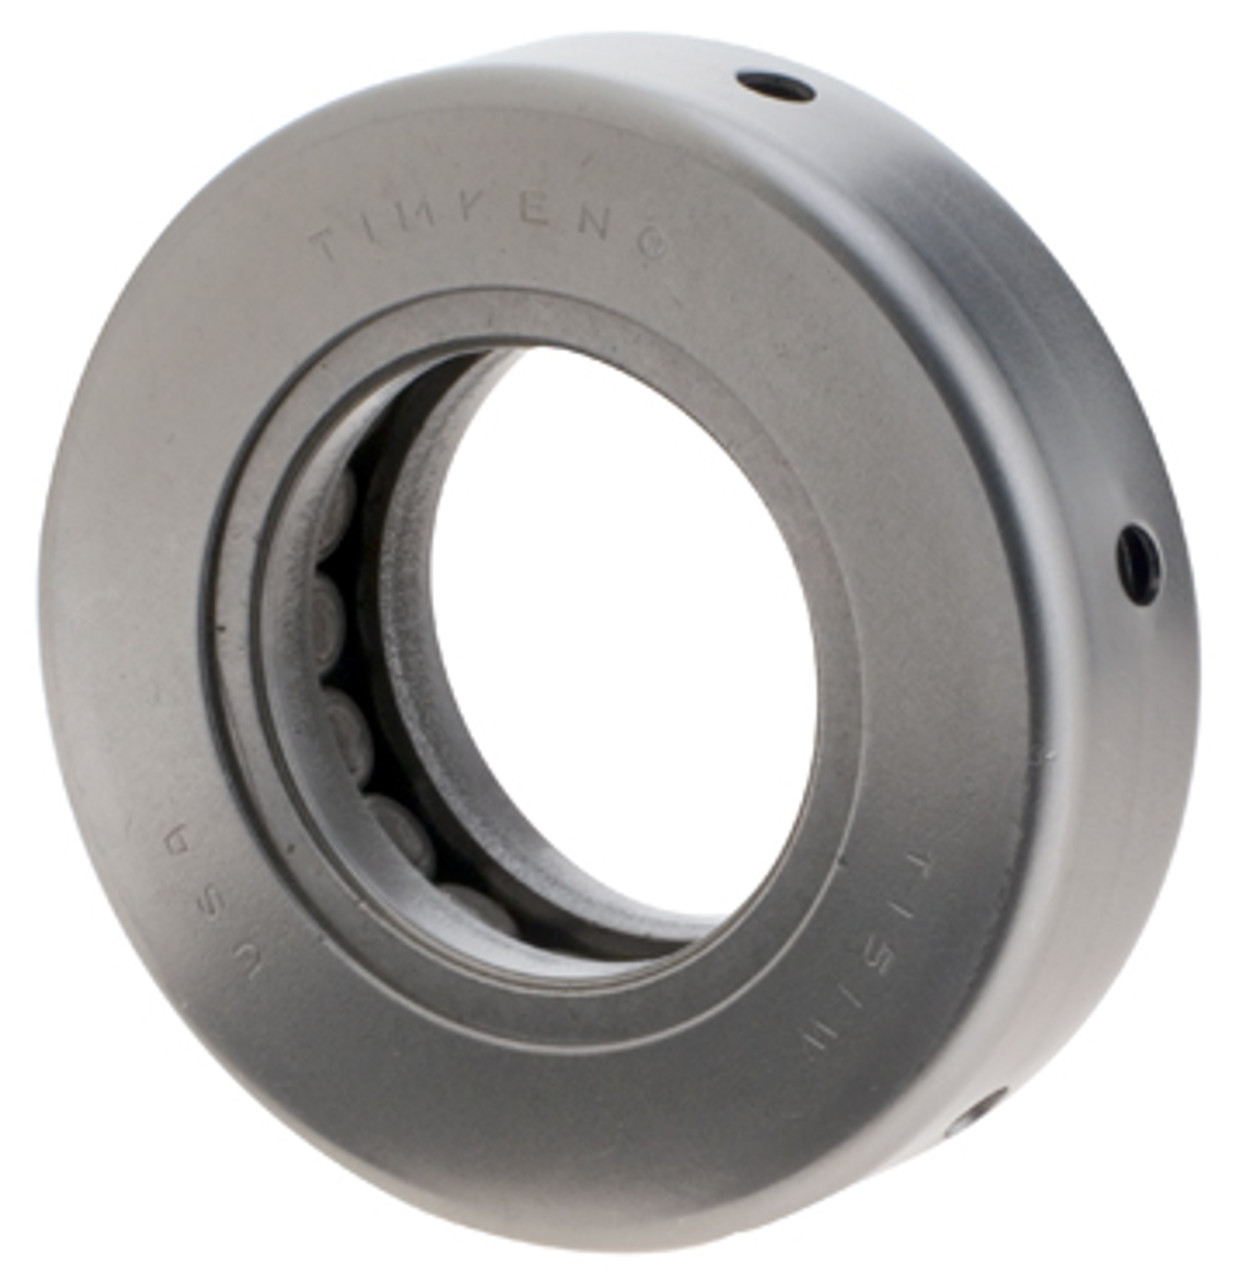 Timken® Stamped Race Thrust Bearing  T201W-904A2